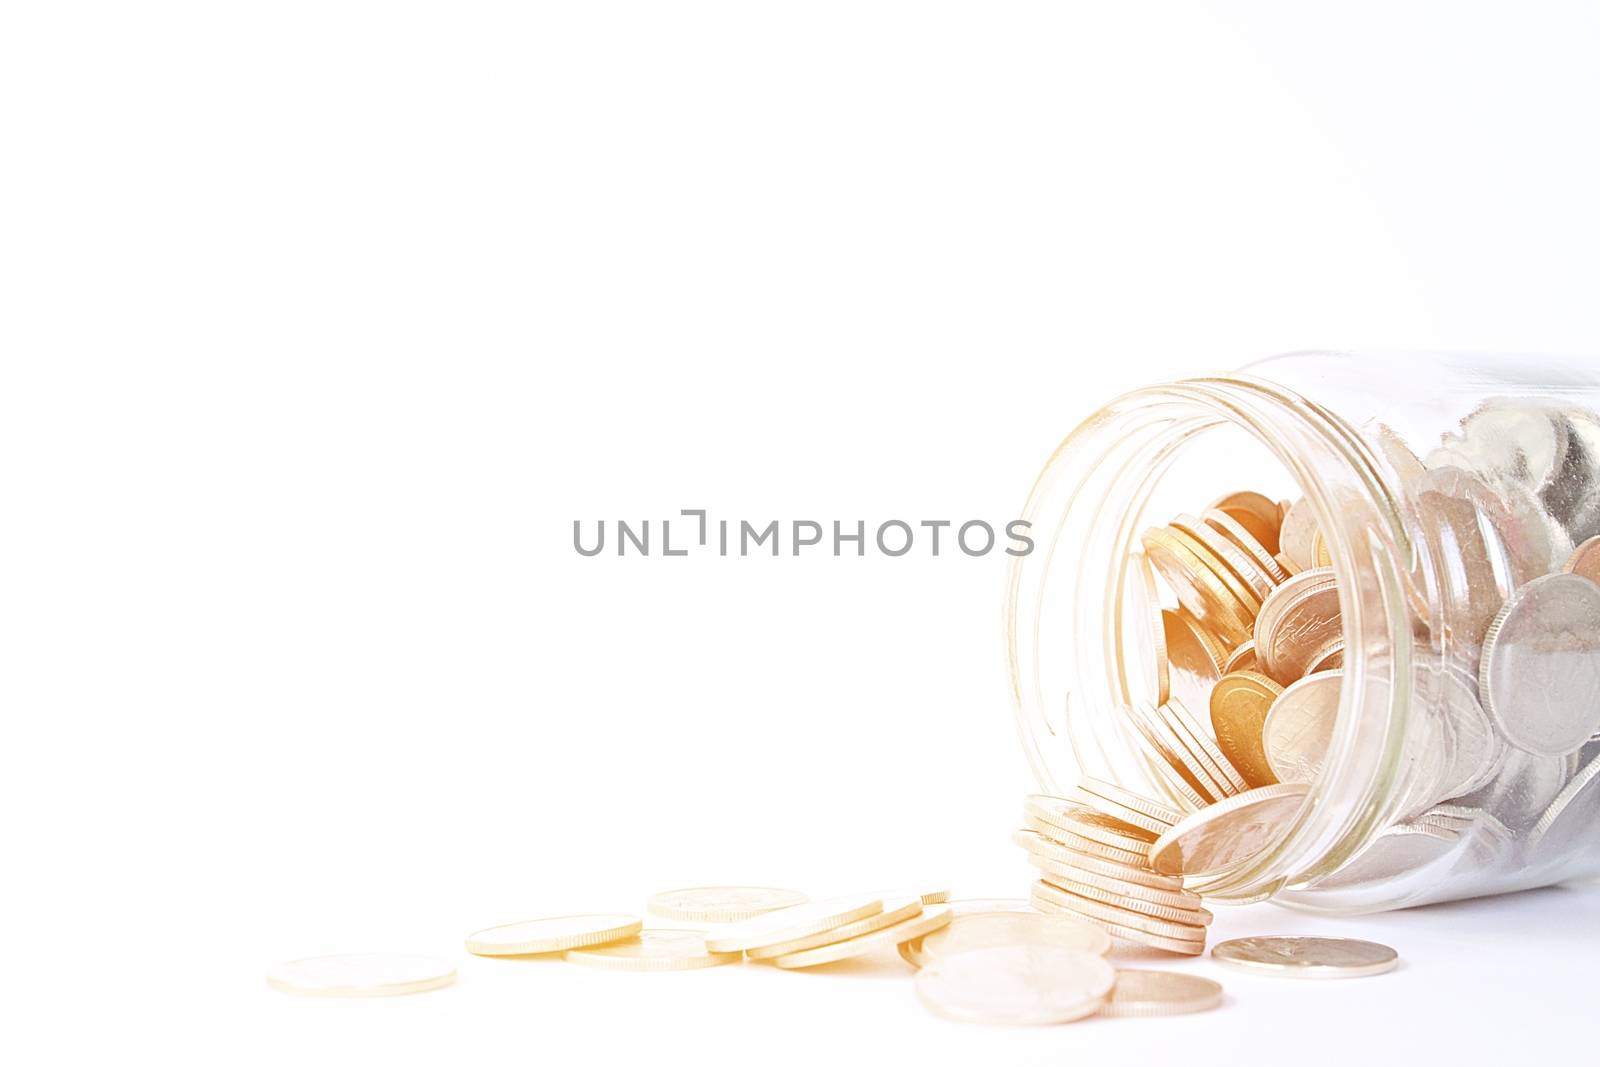 Coins scattered from glass jar on white background by sureeporn